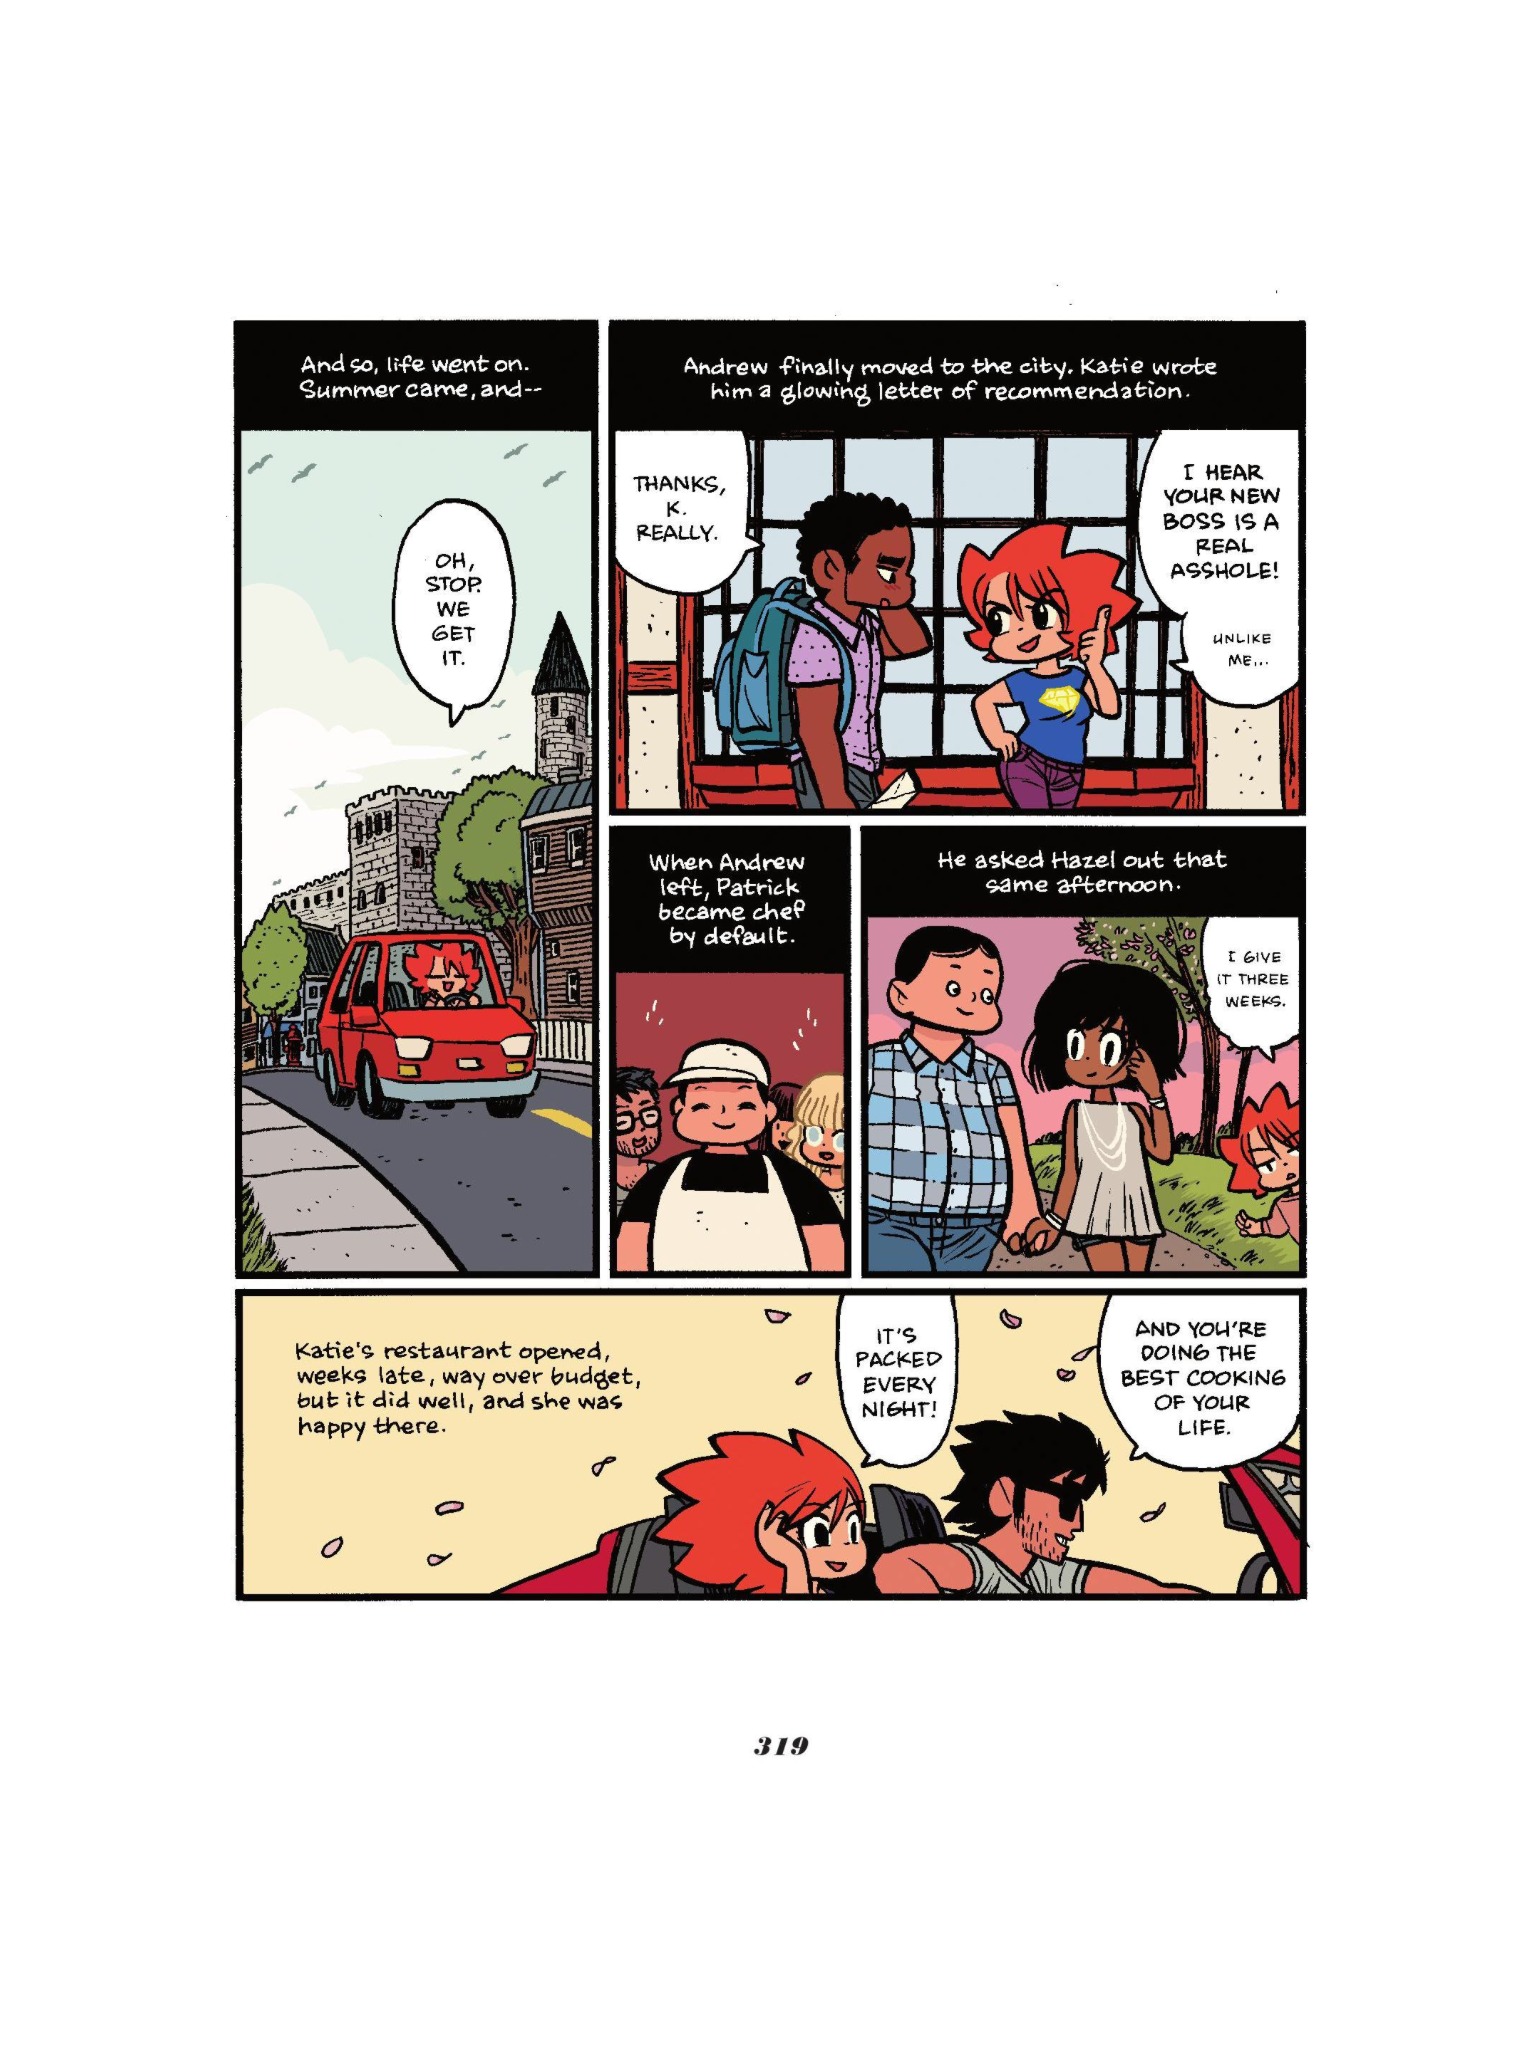 Read online Seconds comic -  Issue # Full - 319